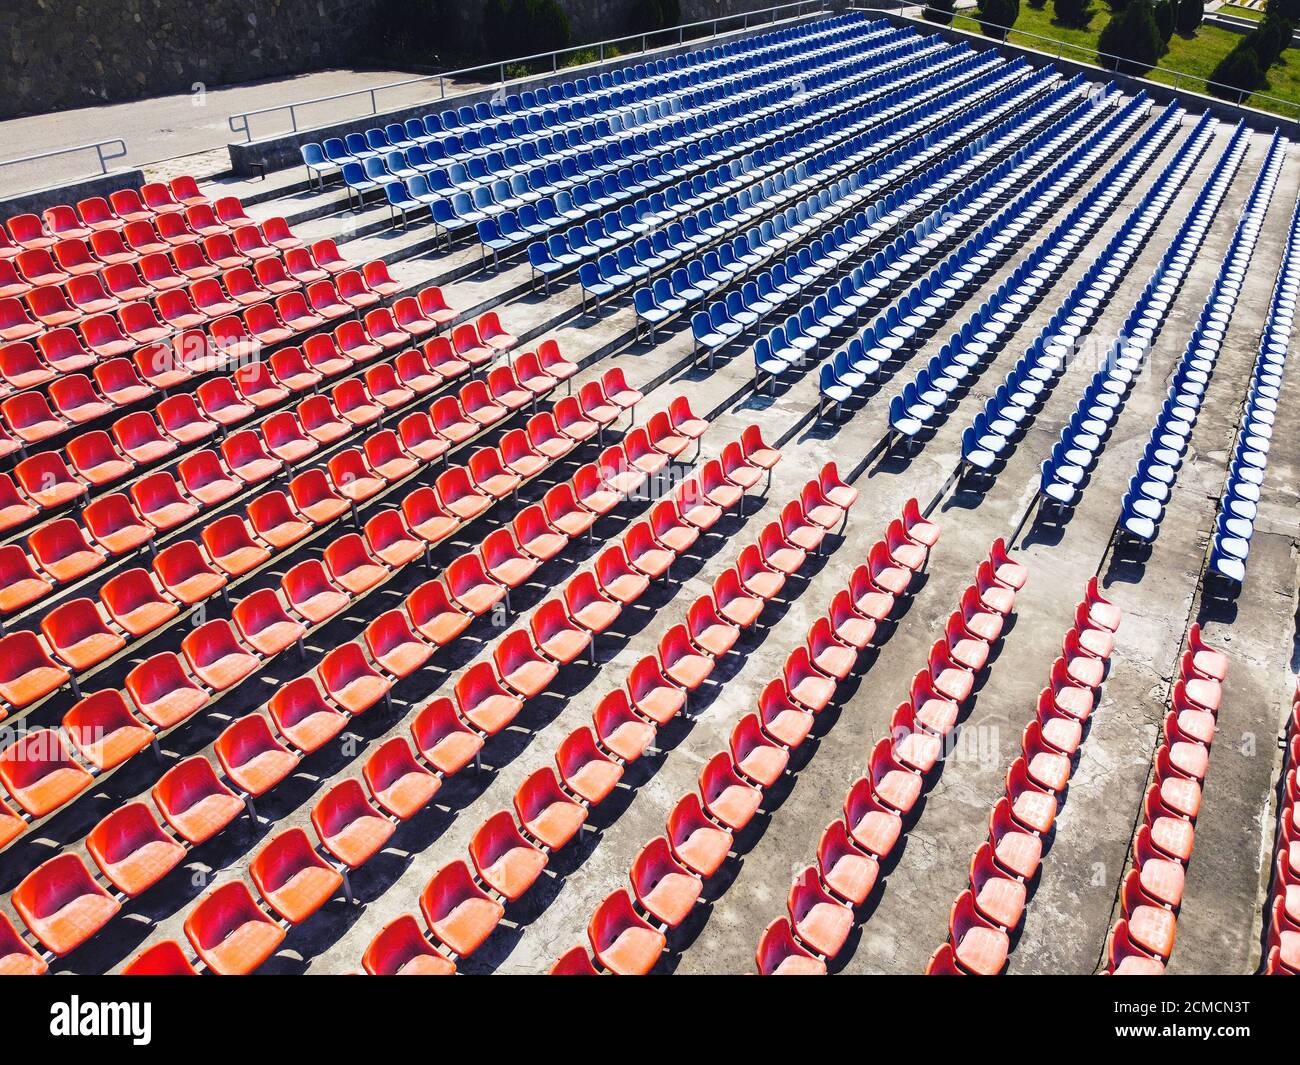 Seats on the stadium stand aerial view Stock Photo - Alamy